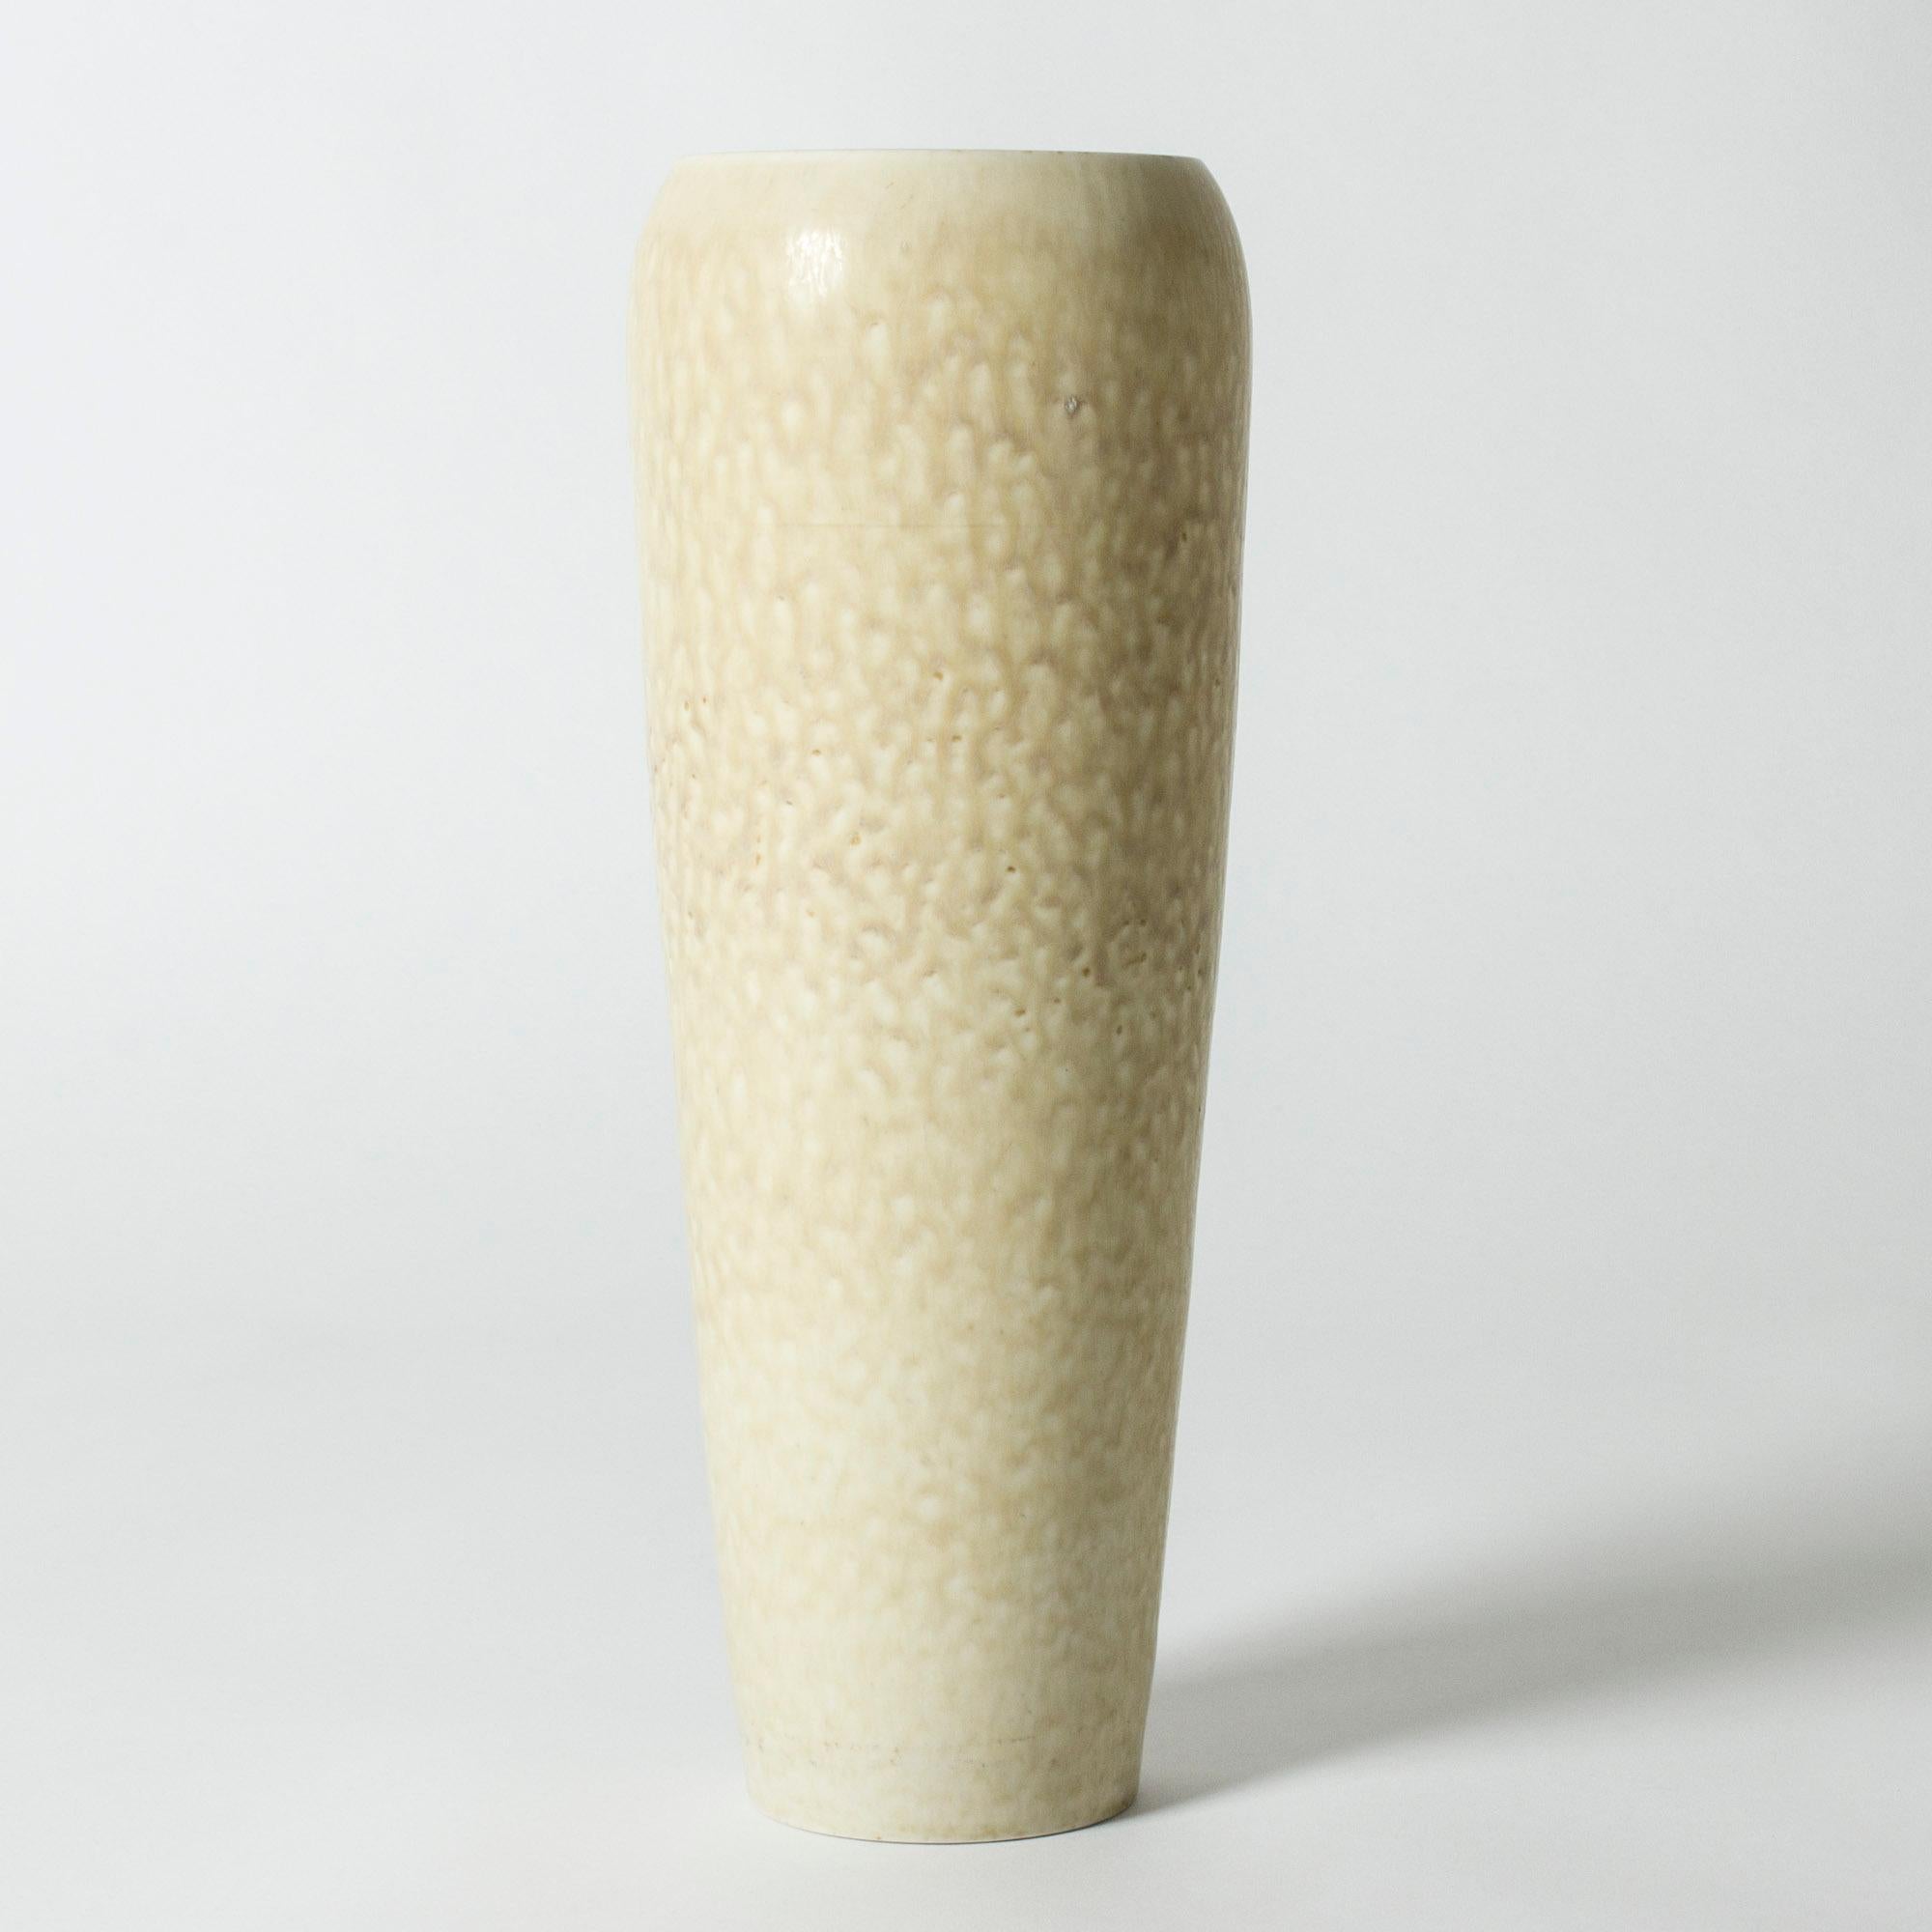 Beautiful, unique stoneware floor vase by Carl-Harry Stålhane. Tapering form with a wide mouth. Cream colored glaze with an organic patterned structure.

Carl-Harry Stålhane was one of the stars among Swedish ceramic artists during the 1950s,